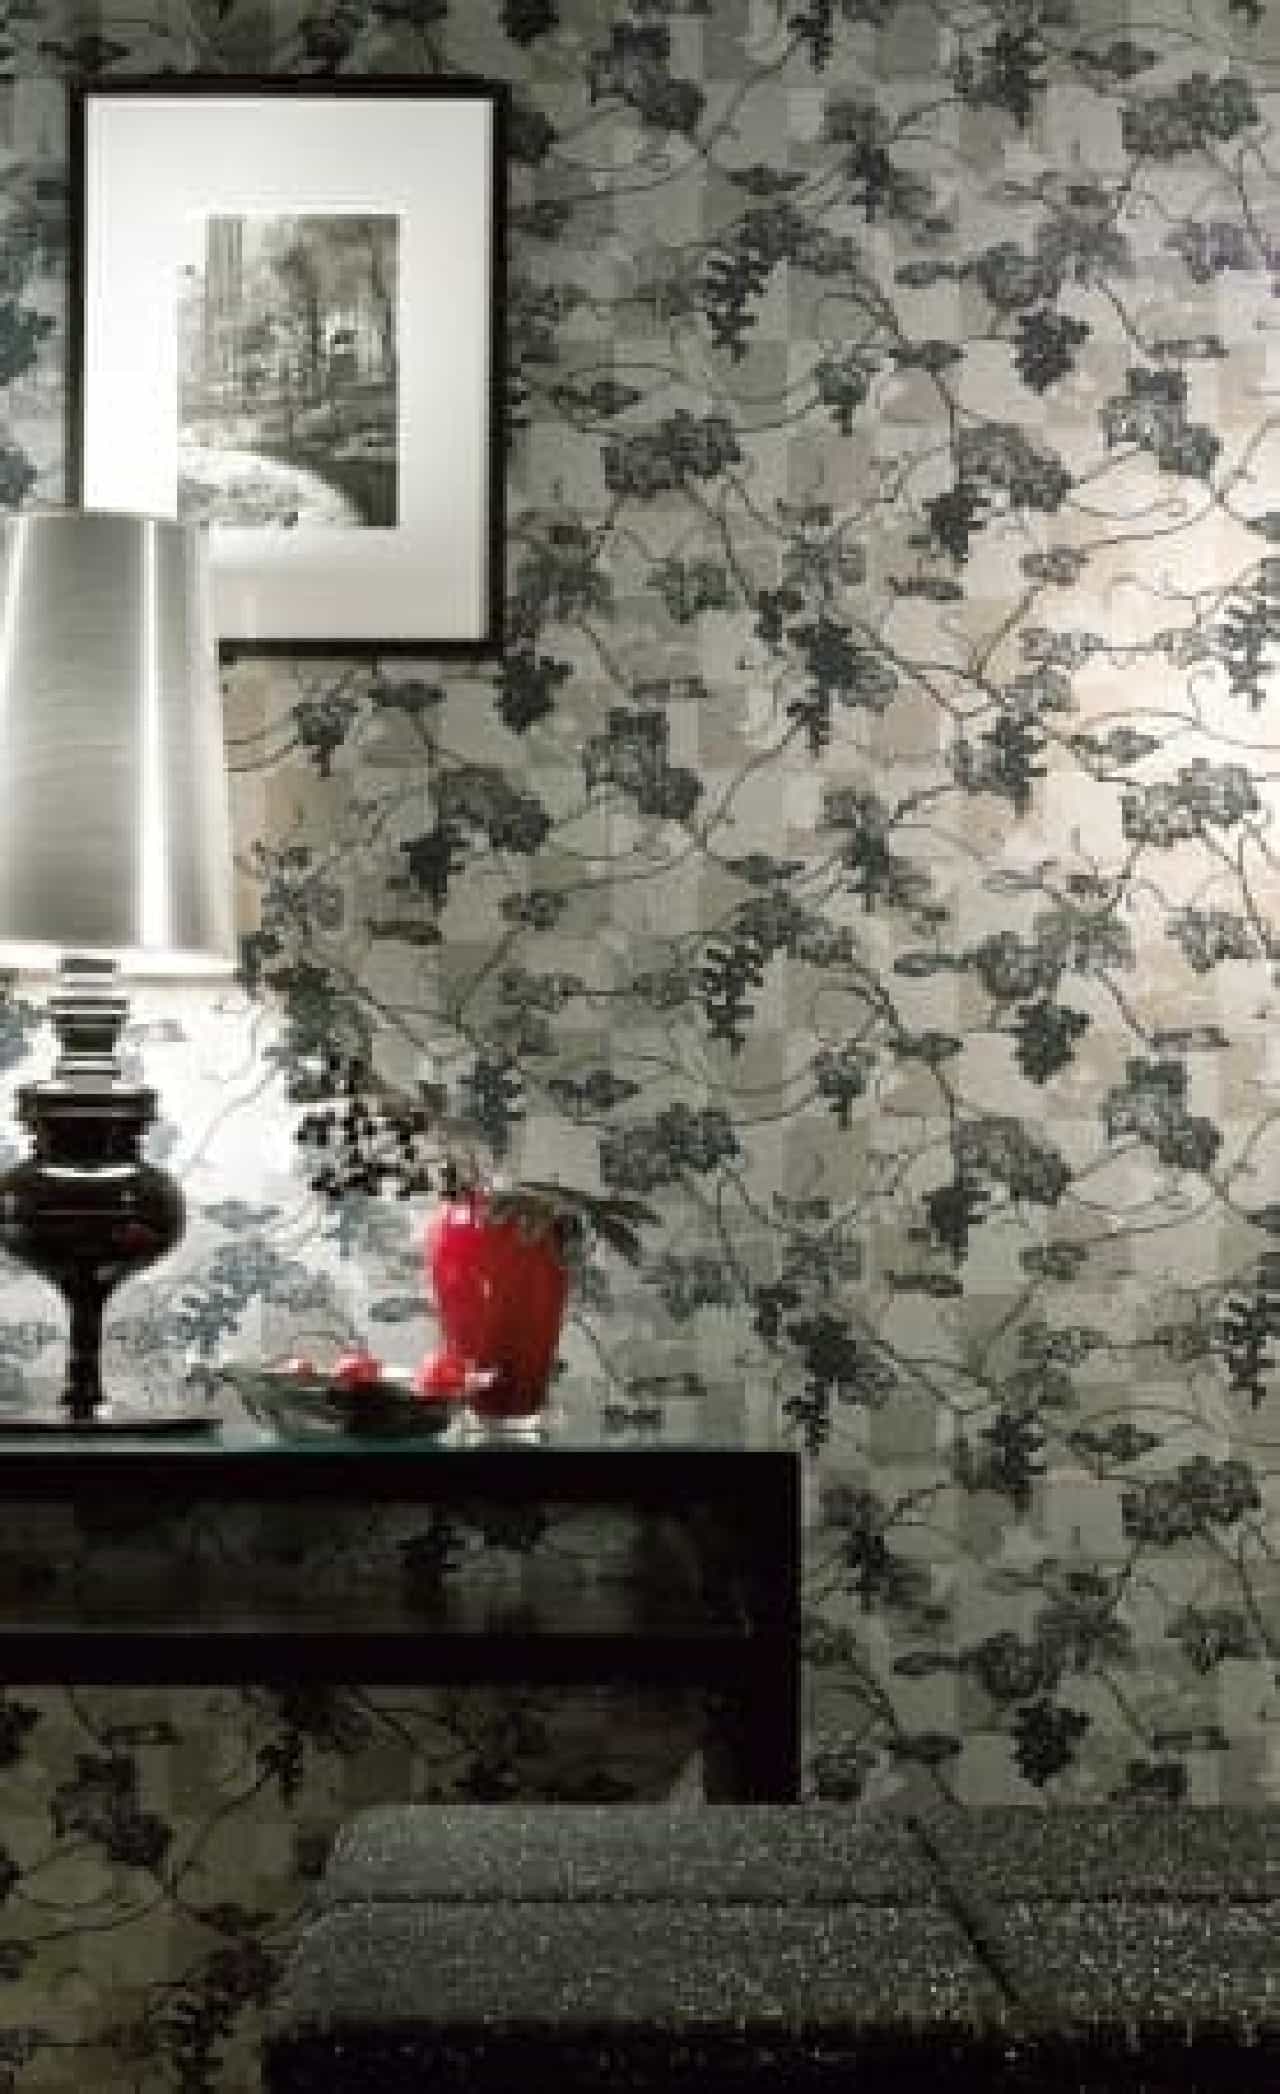 Wallpaper construction example with the image of "Rinpa"